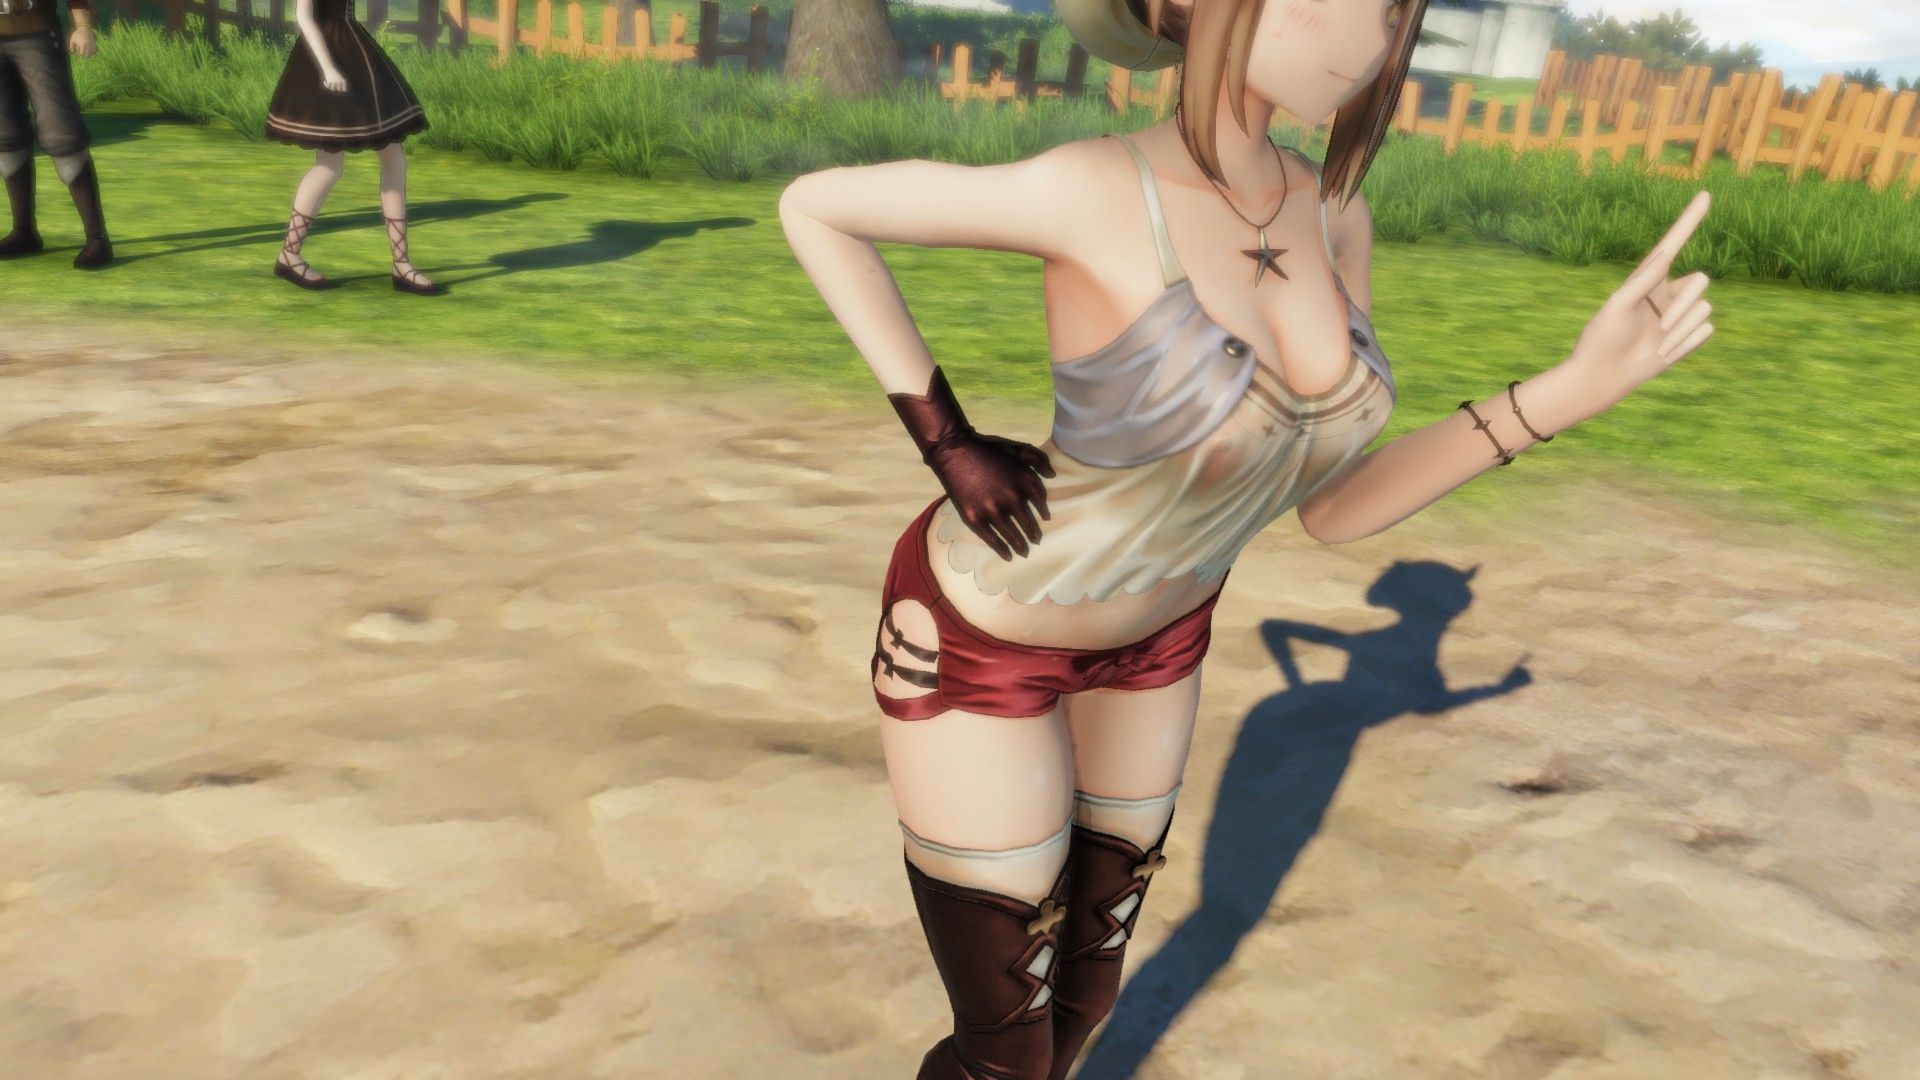 Buy a PC version liza atelier but also spend 2 days to make nipples transparent with erotic MOD ... 11